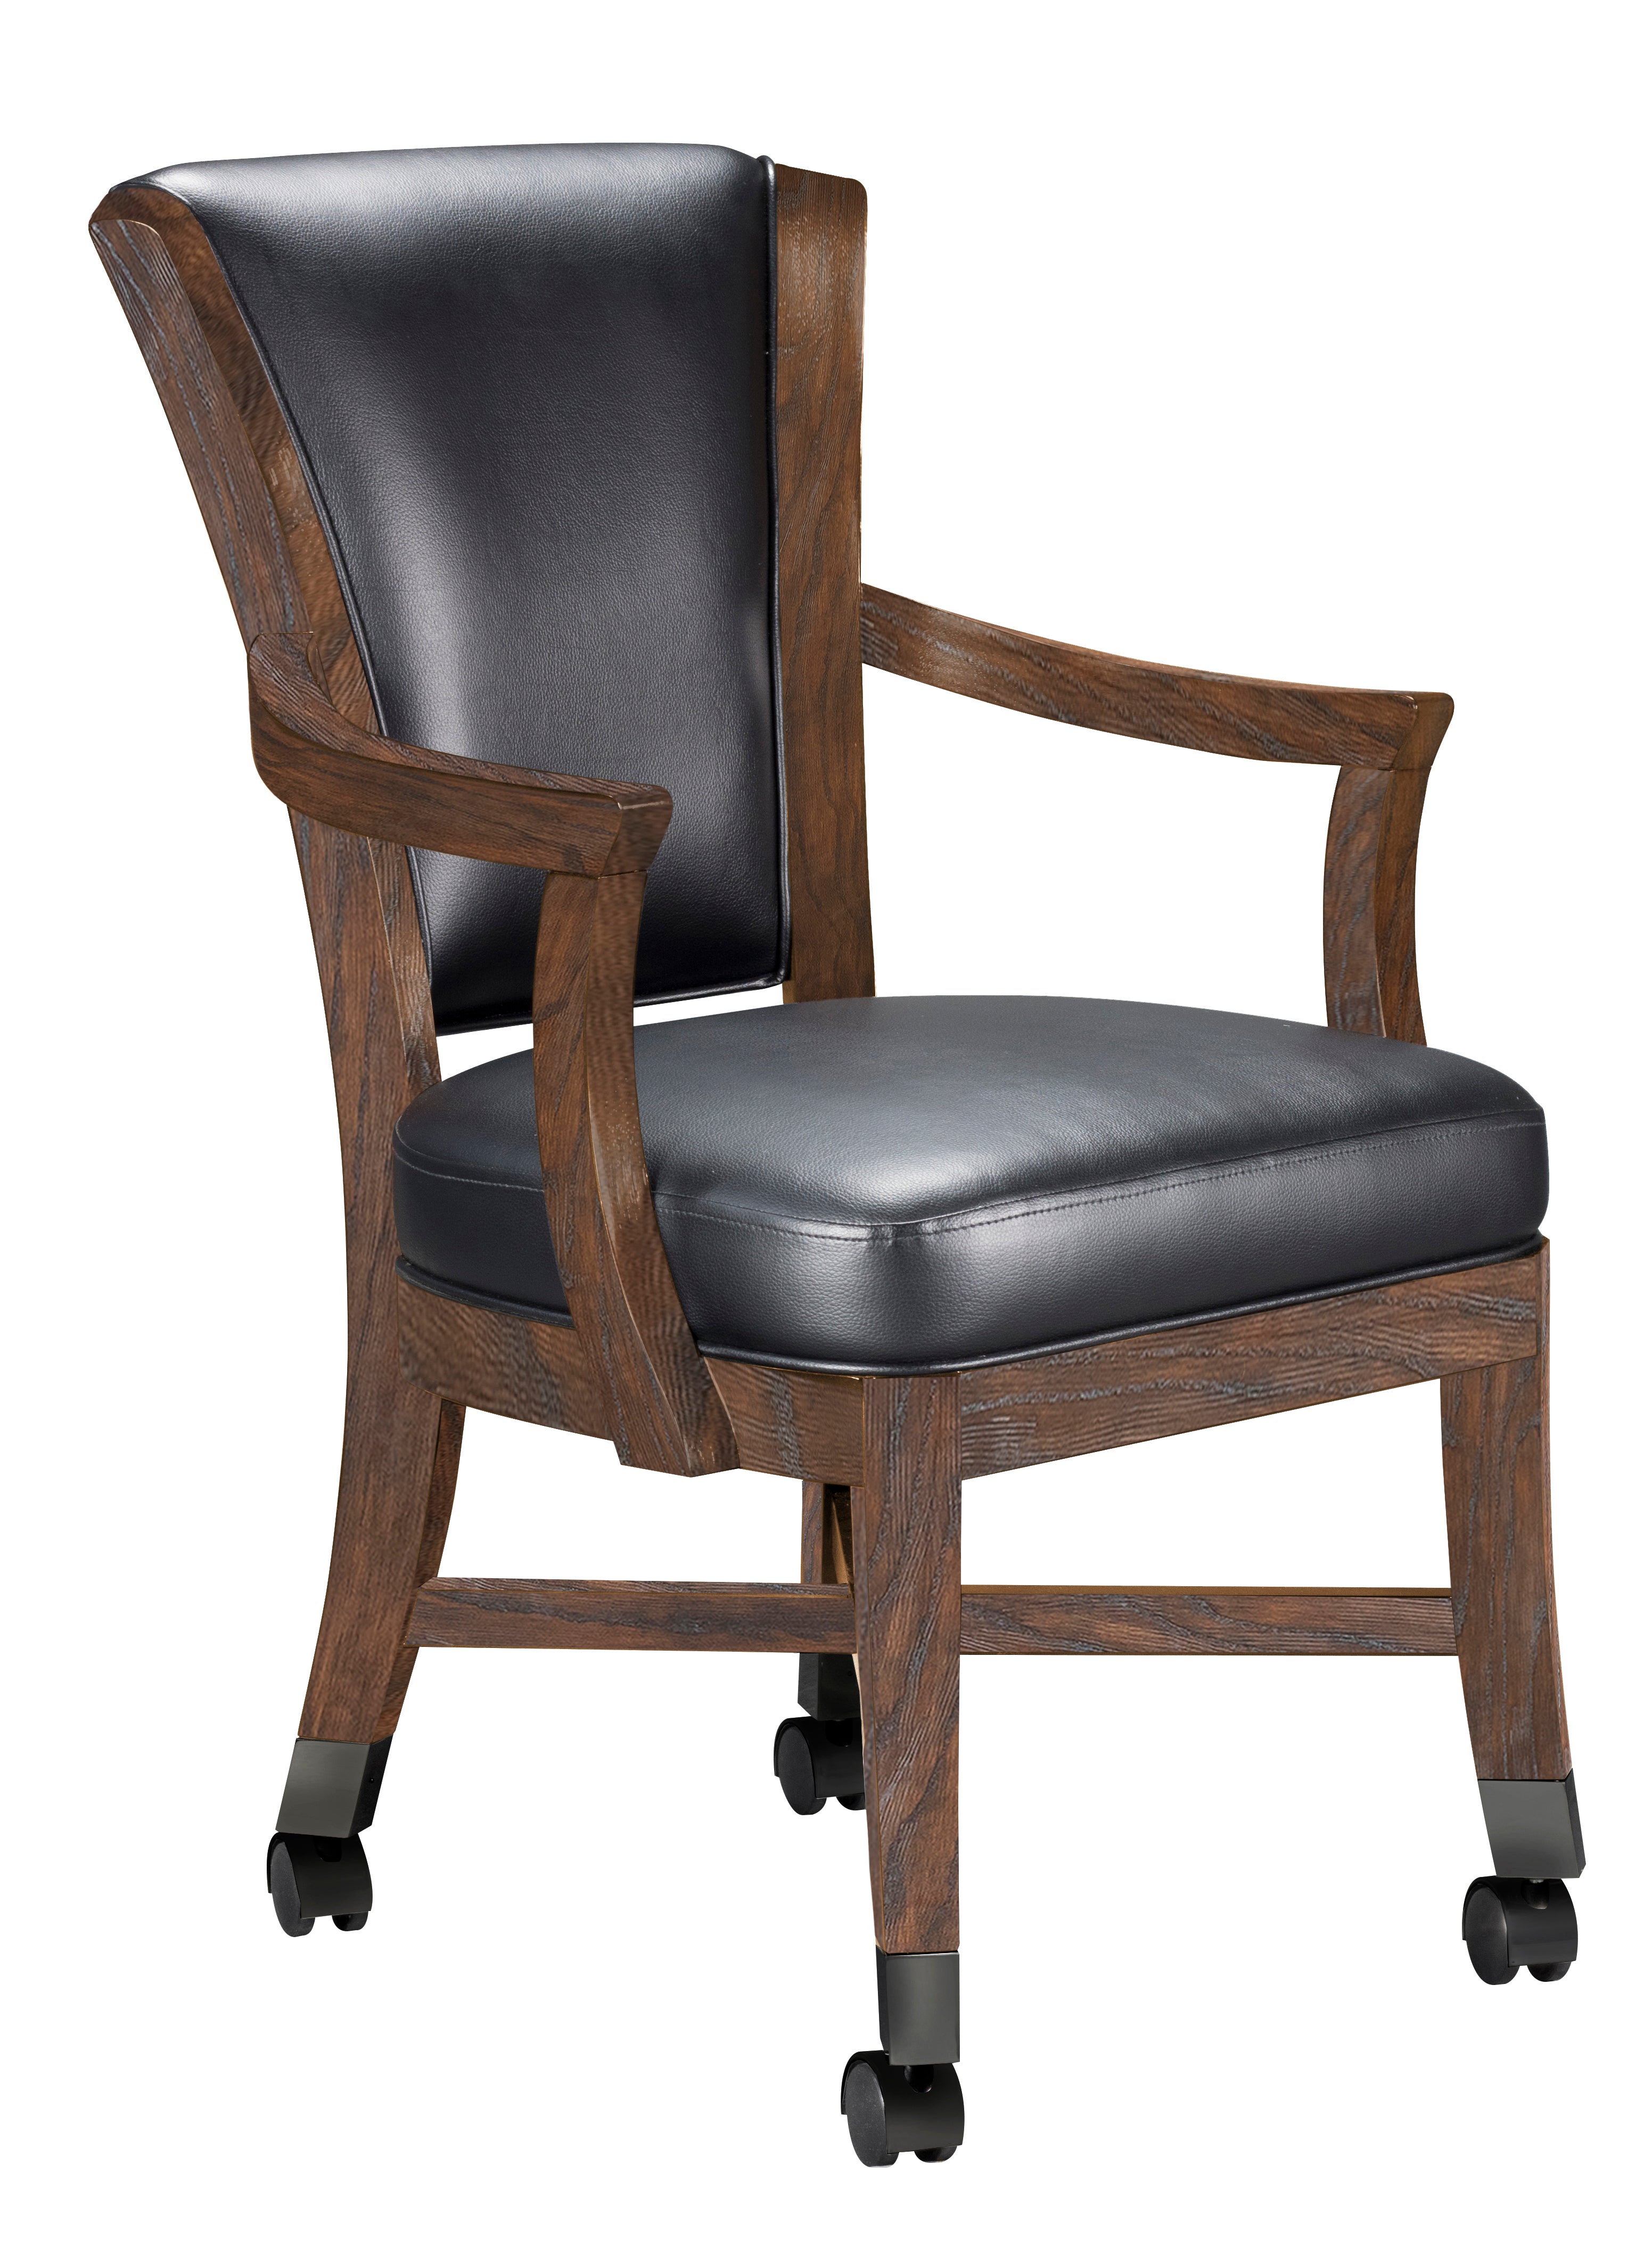 Legacy Billiards Elite Caster Game Chair in Whiskey Barrel Finish